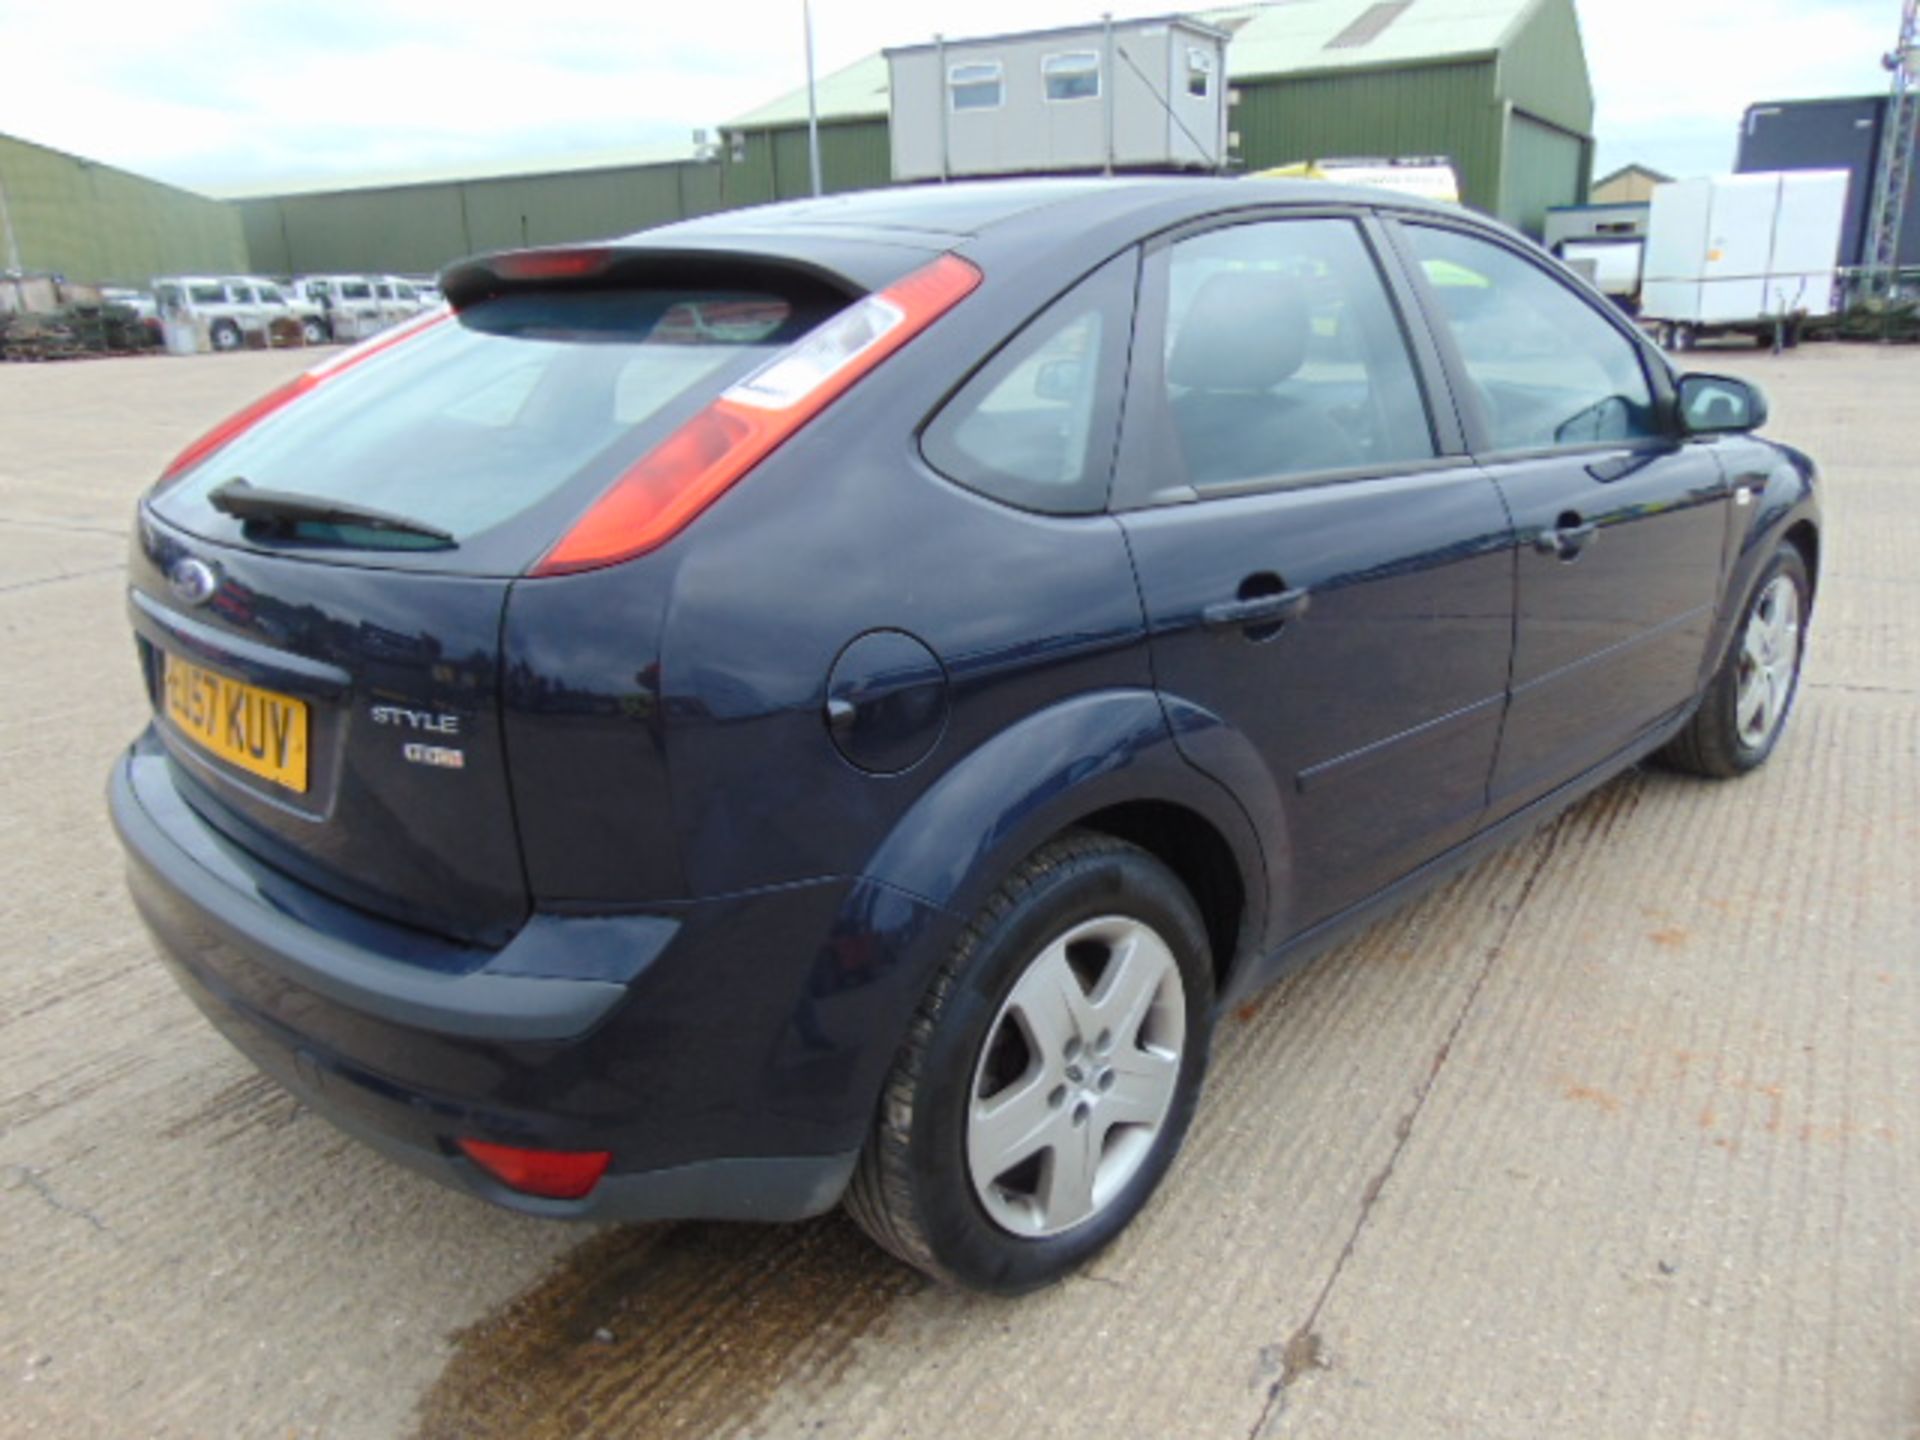 Ford Focus 1.8 TDCI Style Hatchback - Image 6 of 18